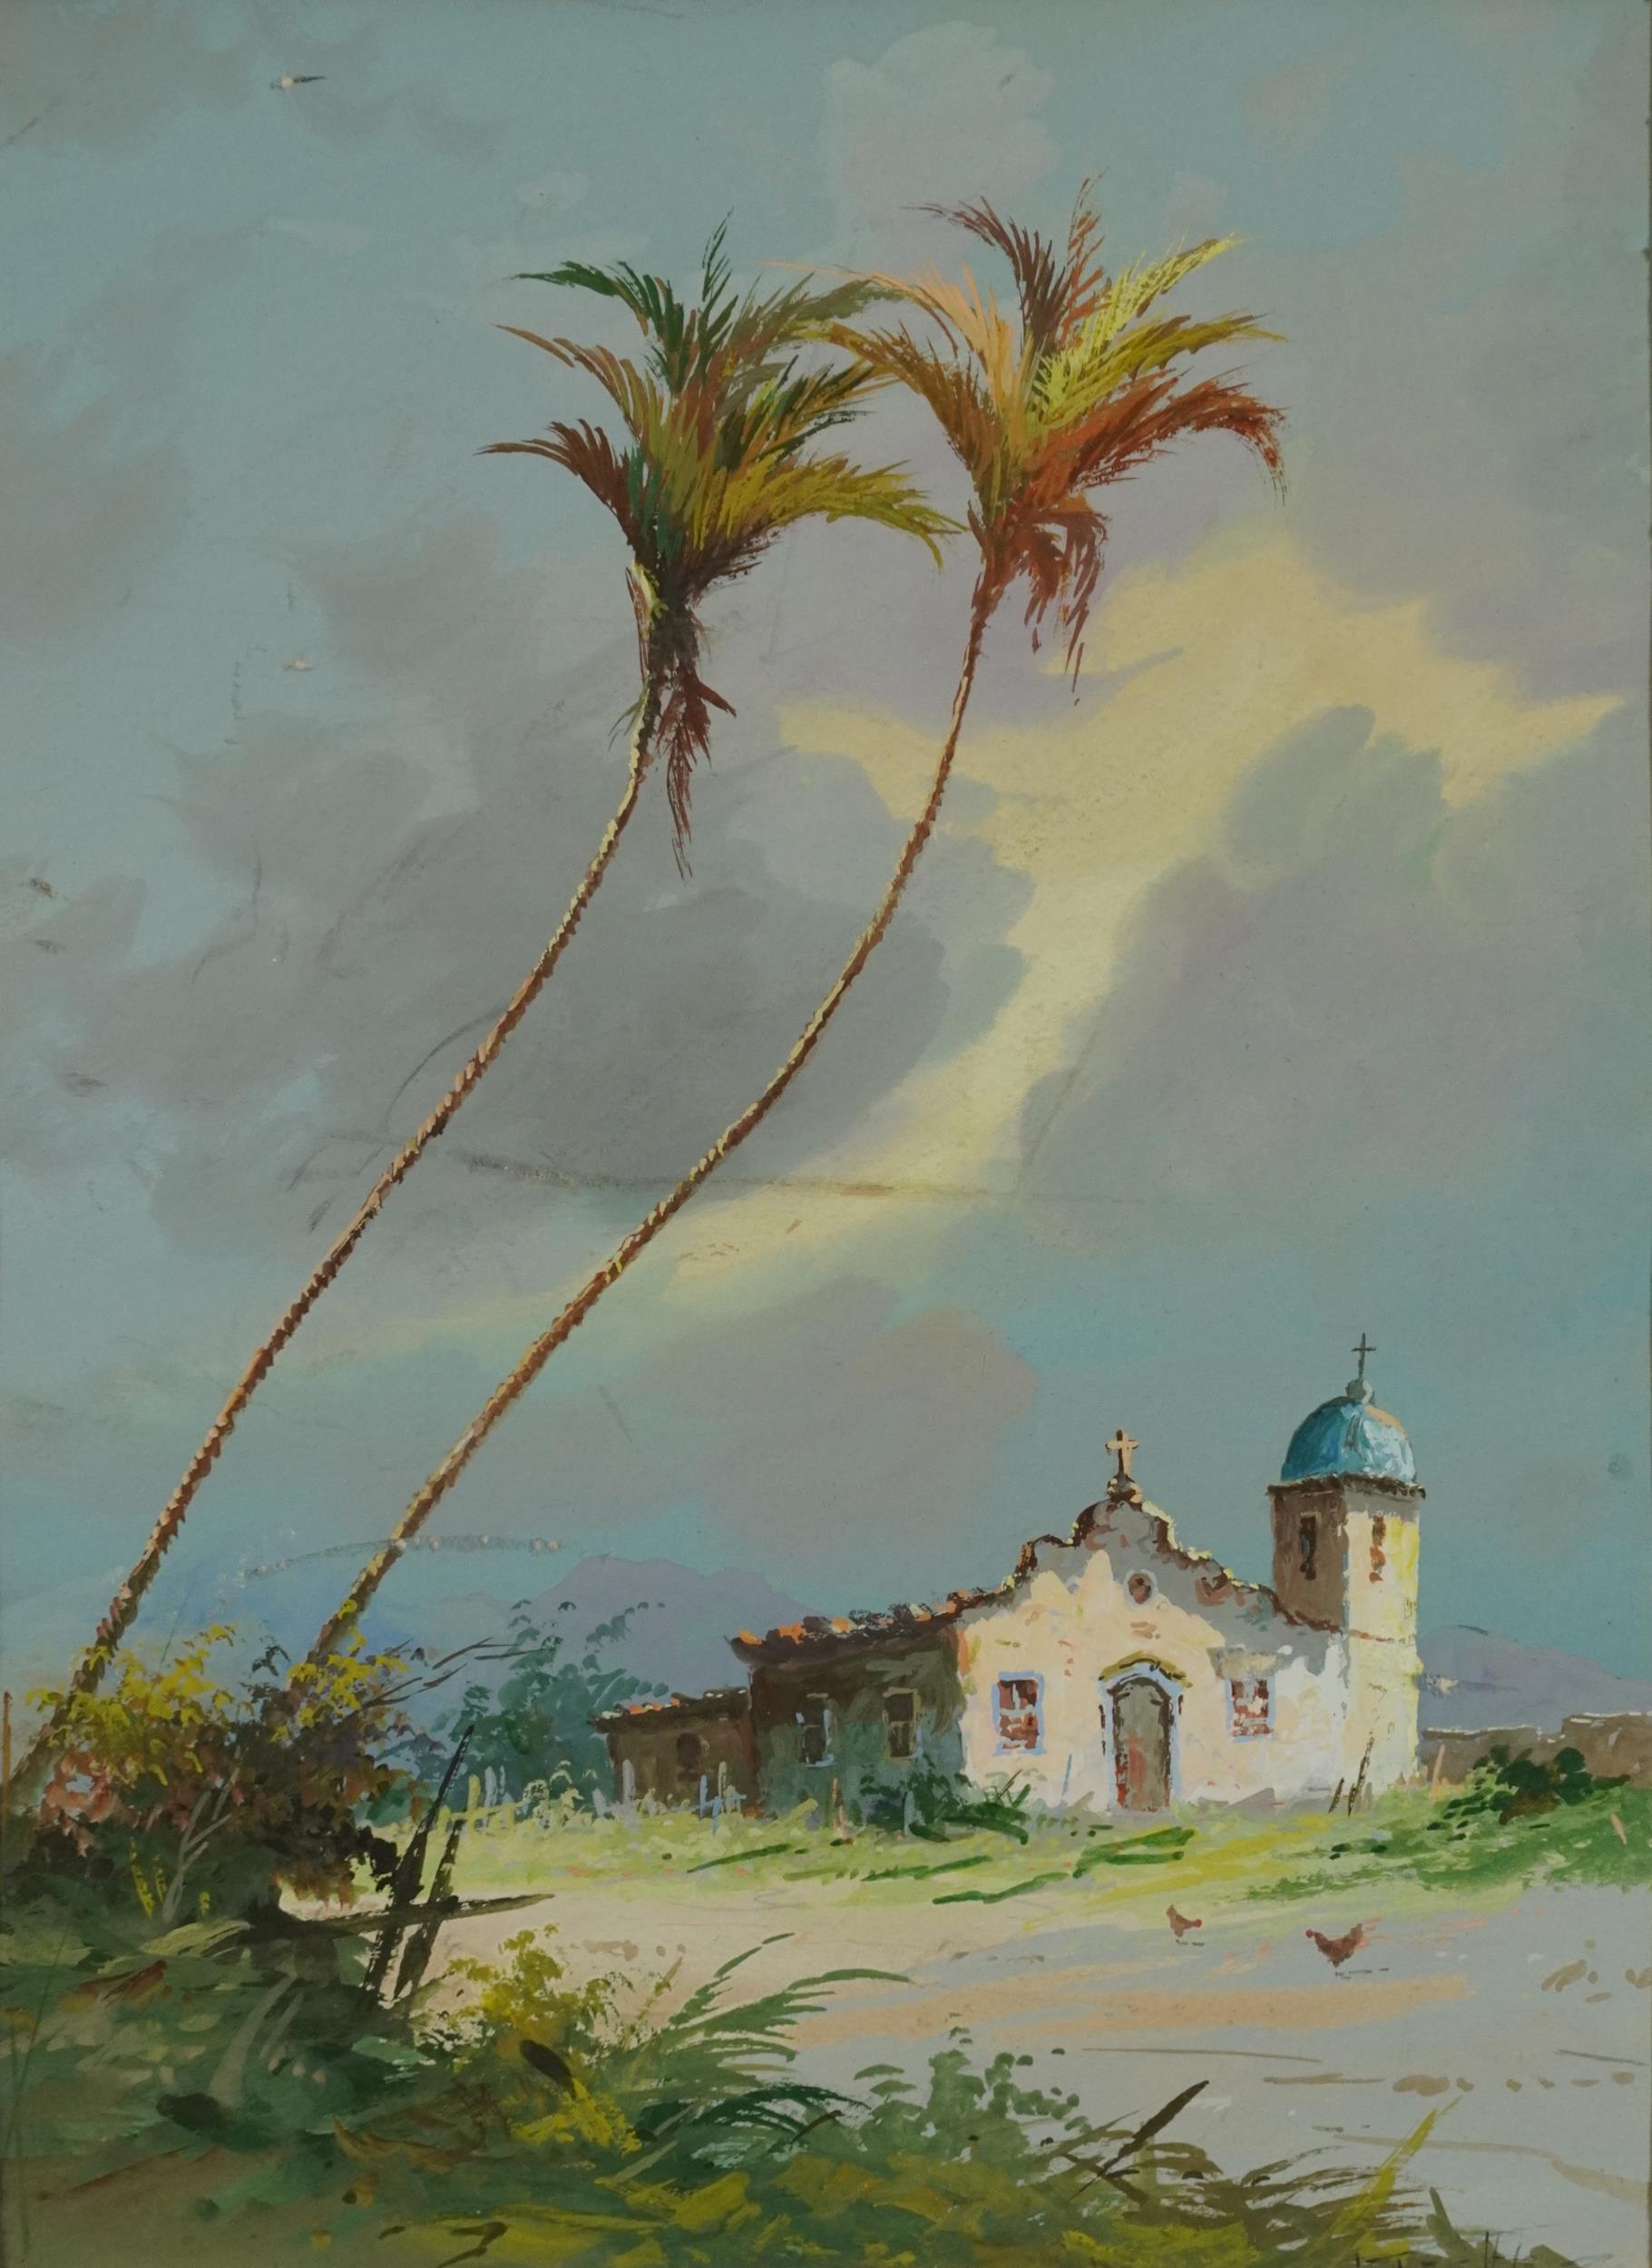 Minero colonial church, continental gouache on card, inscribed verso, mounted, unframed, 27cm x 20cm